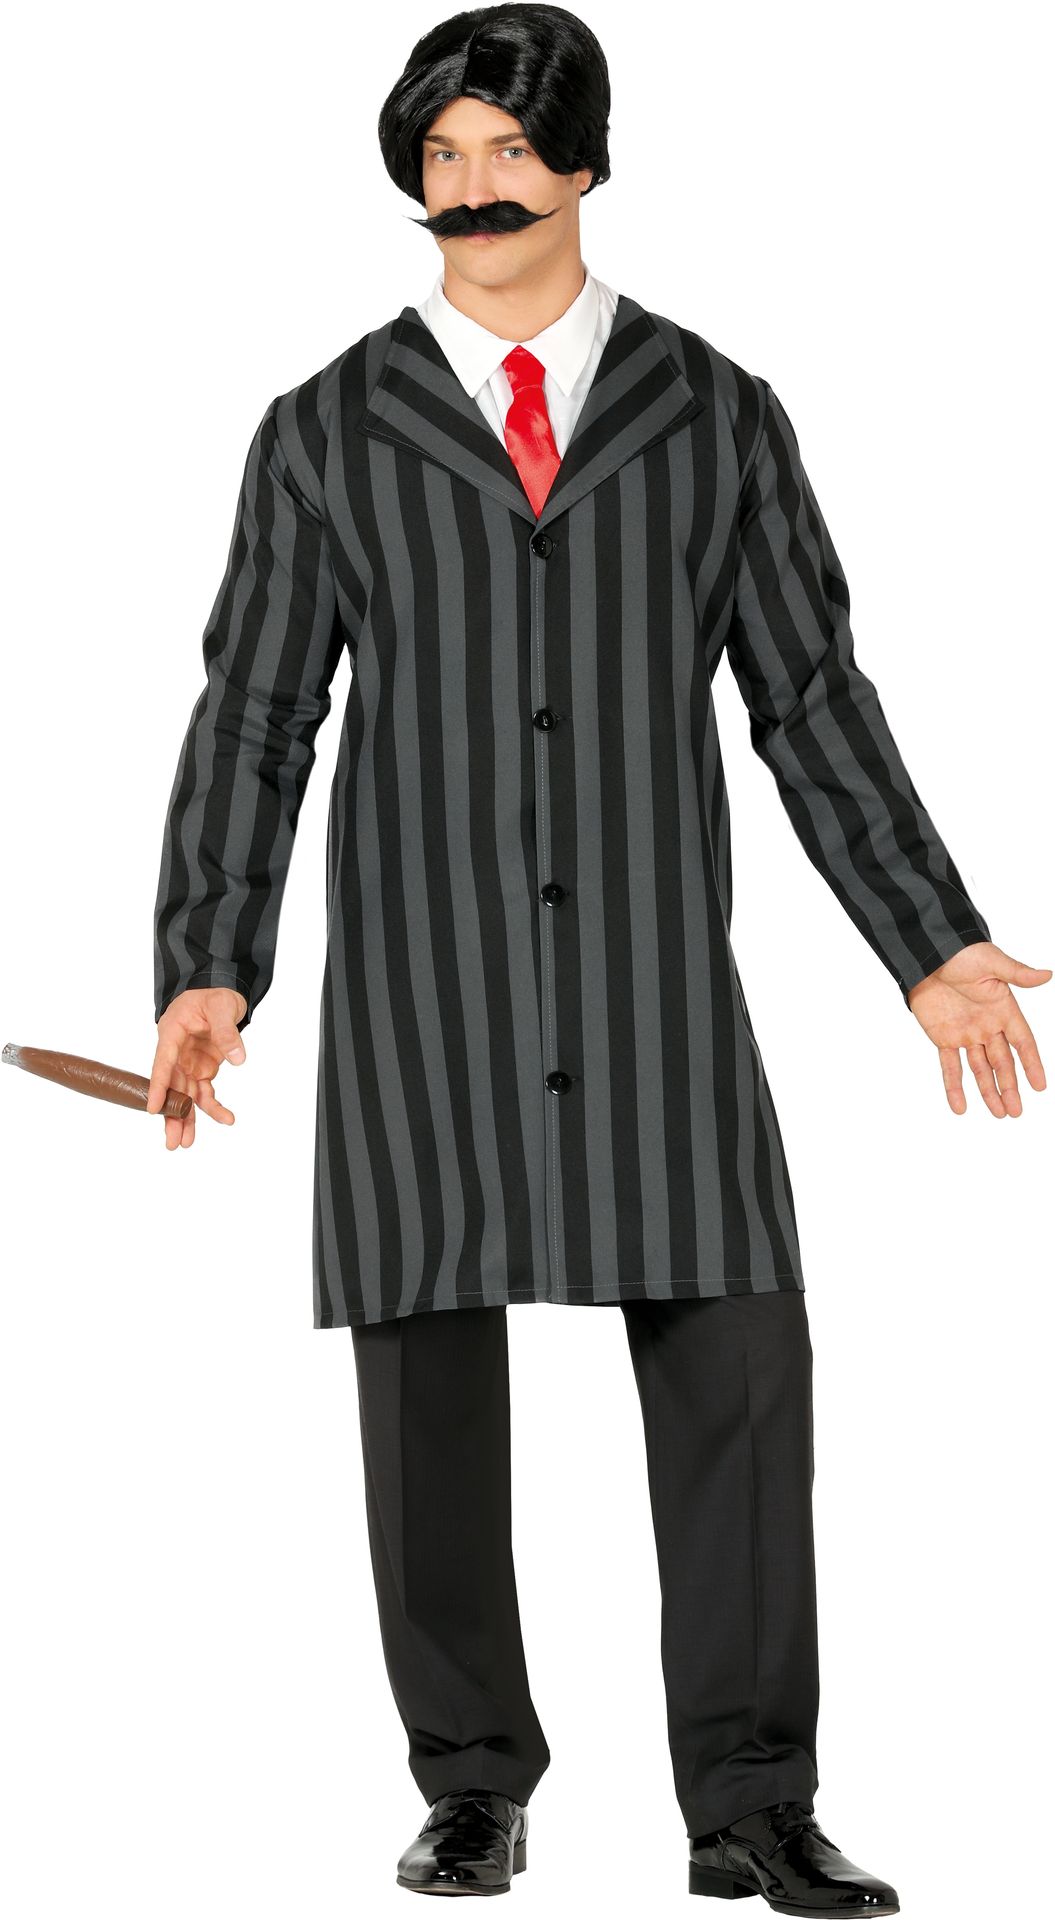 Gomez Addams outfit mannen